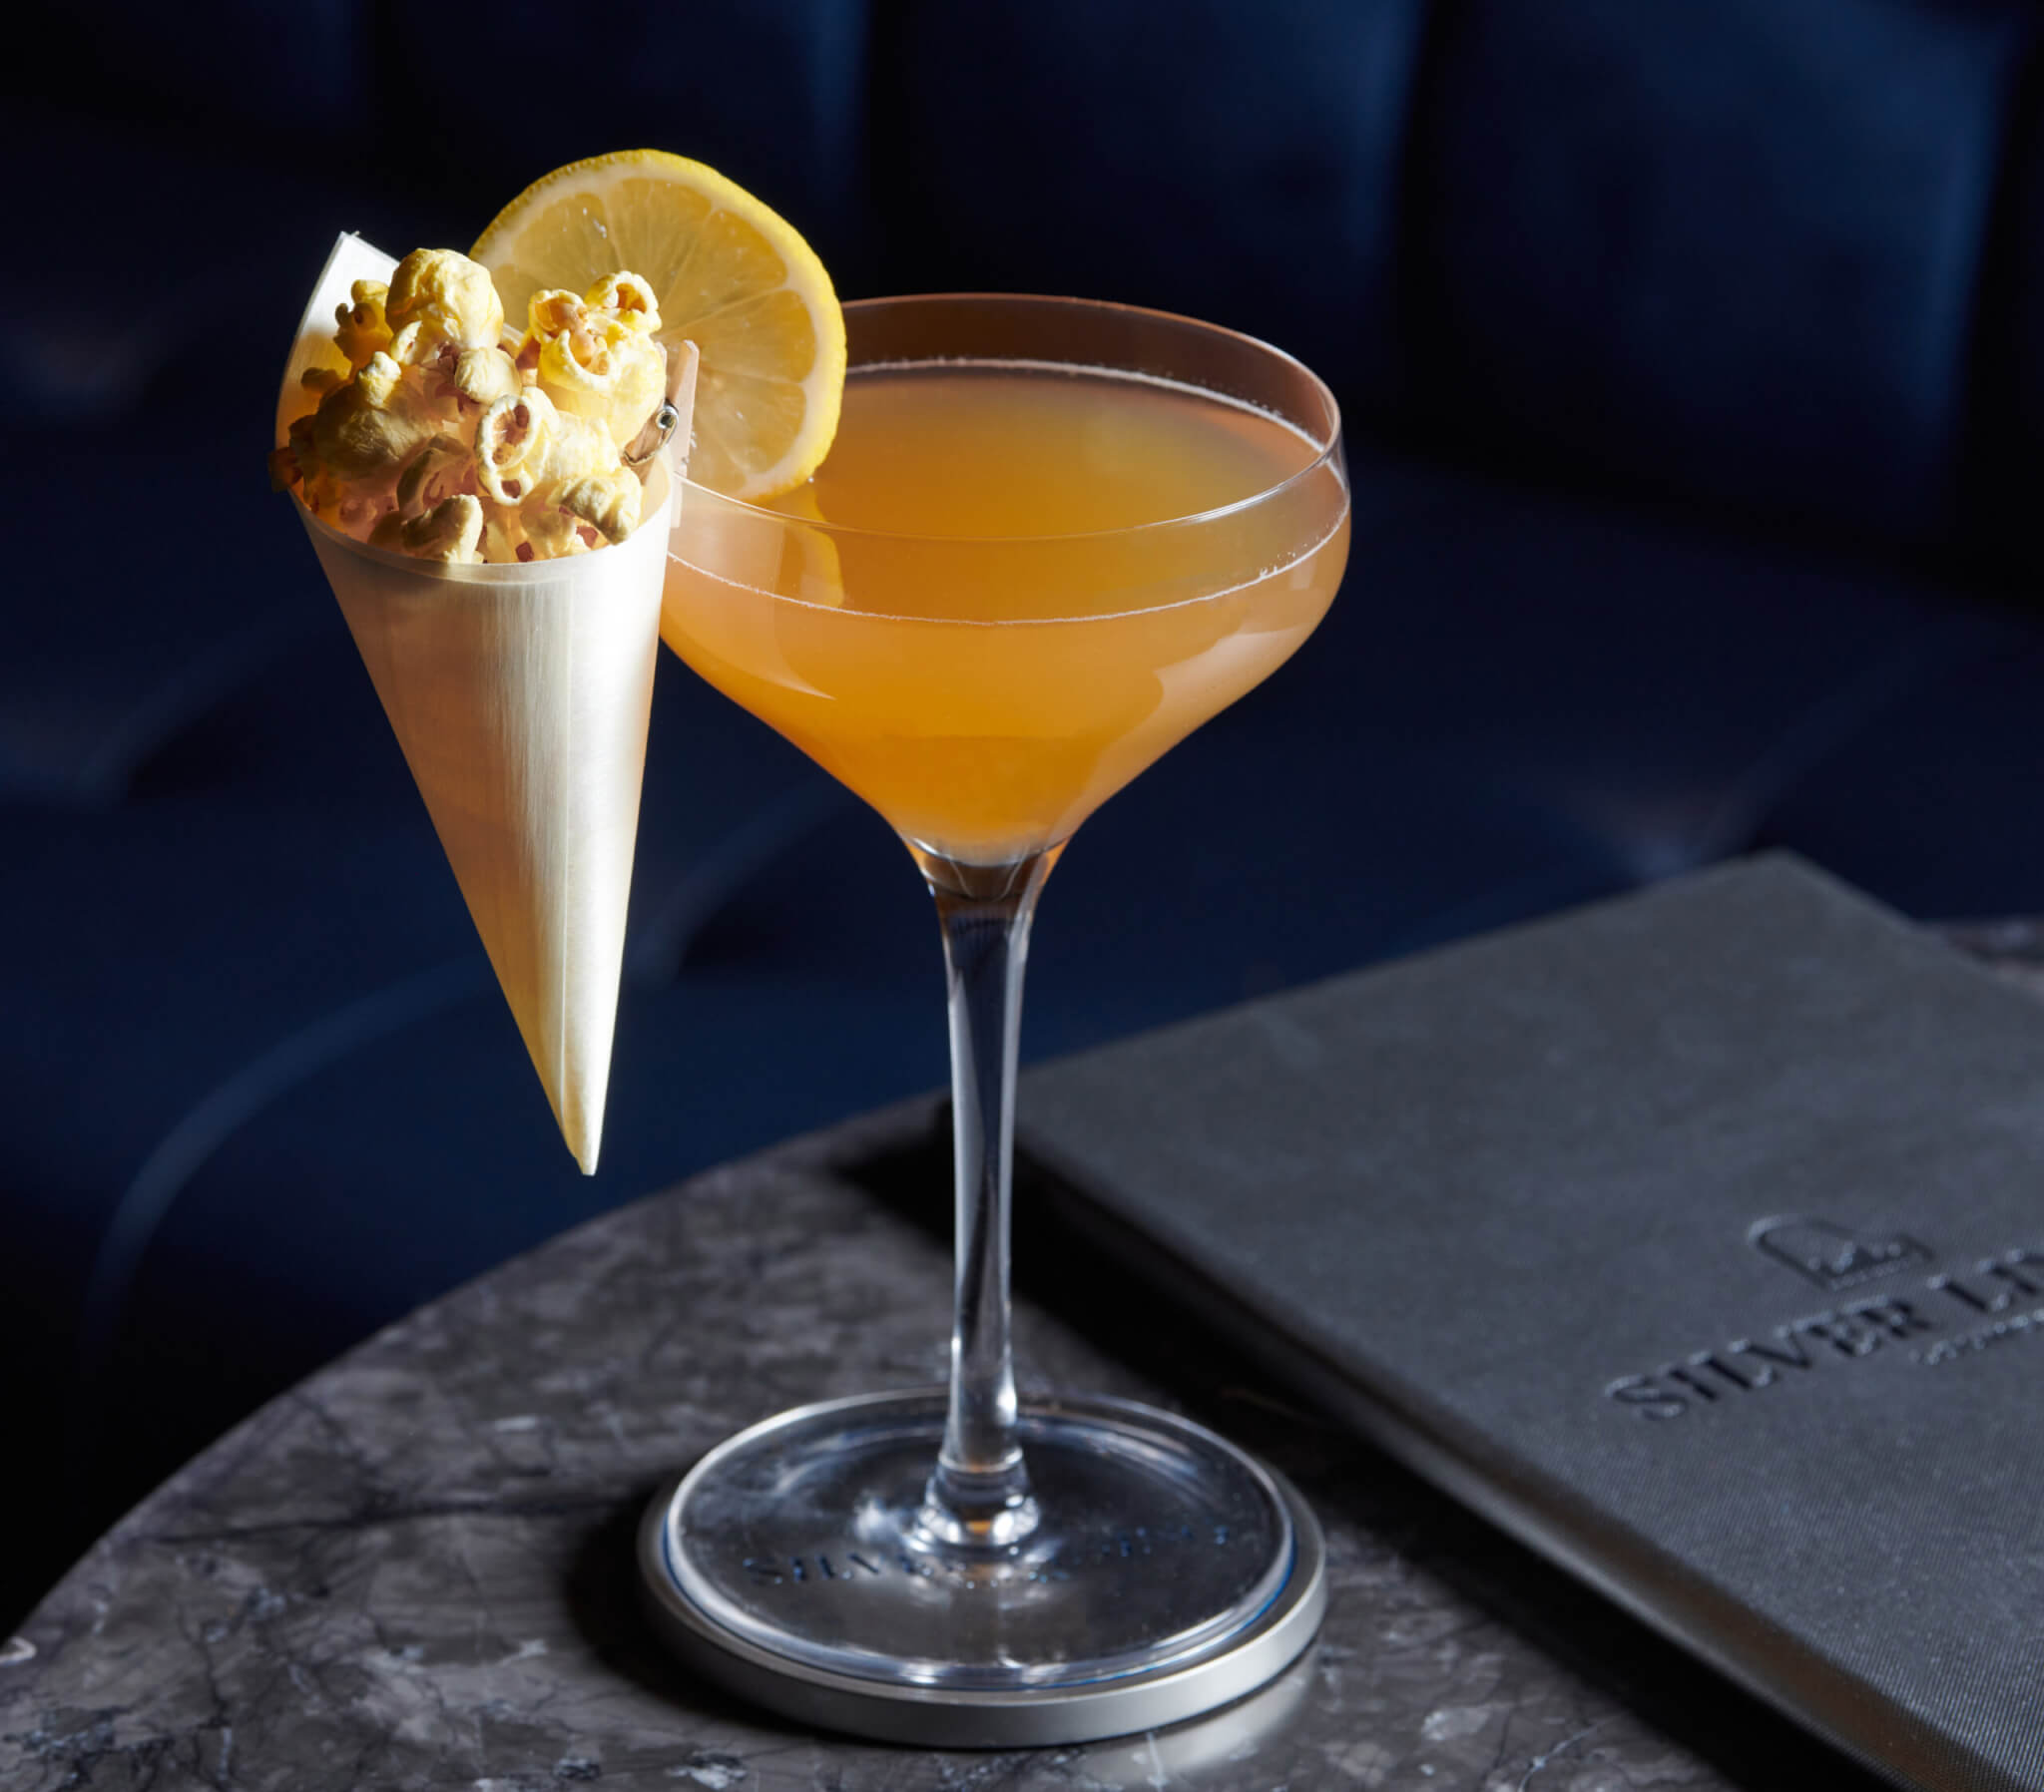 silver lining popcorn cocktail